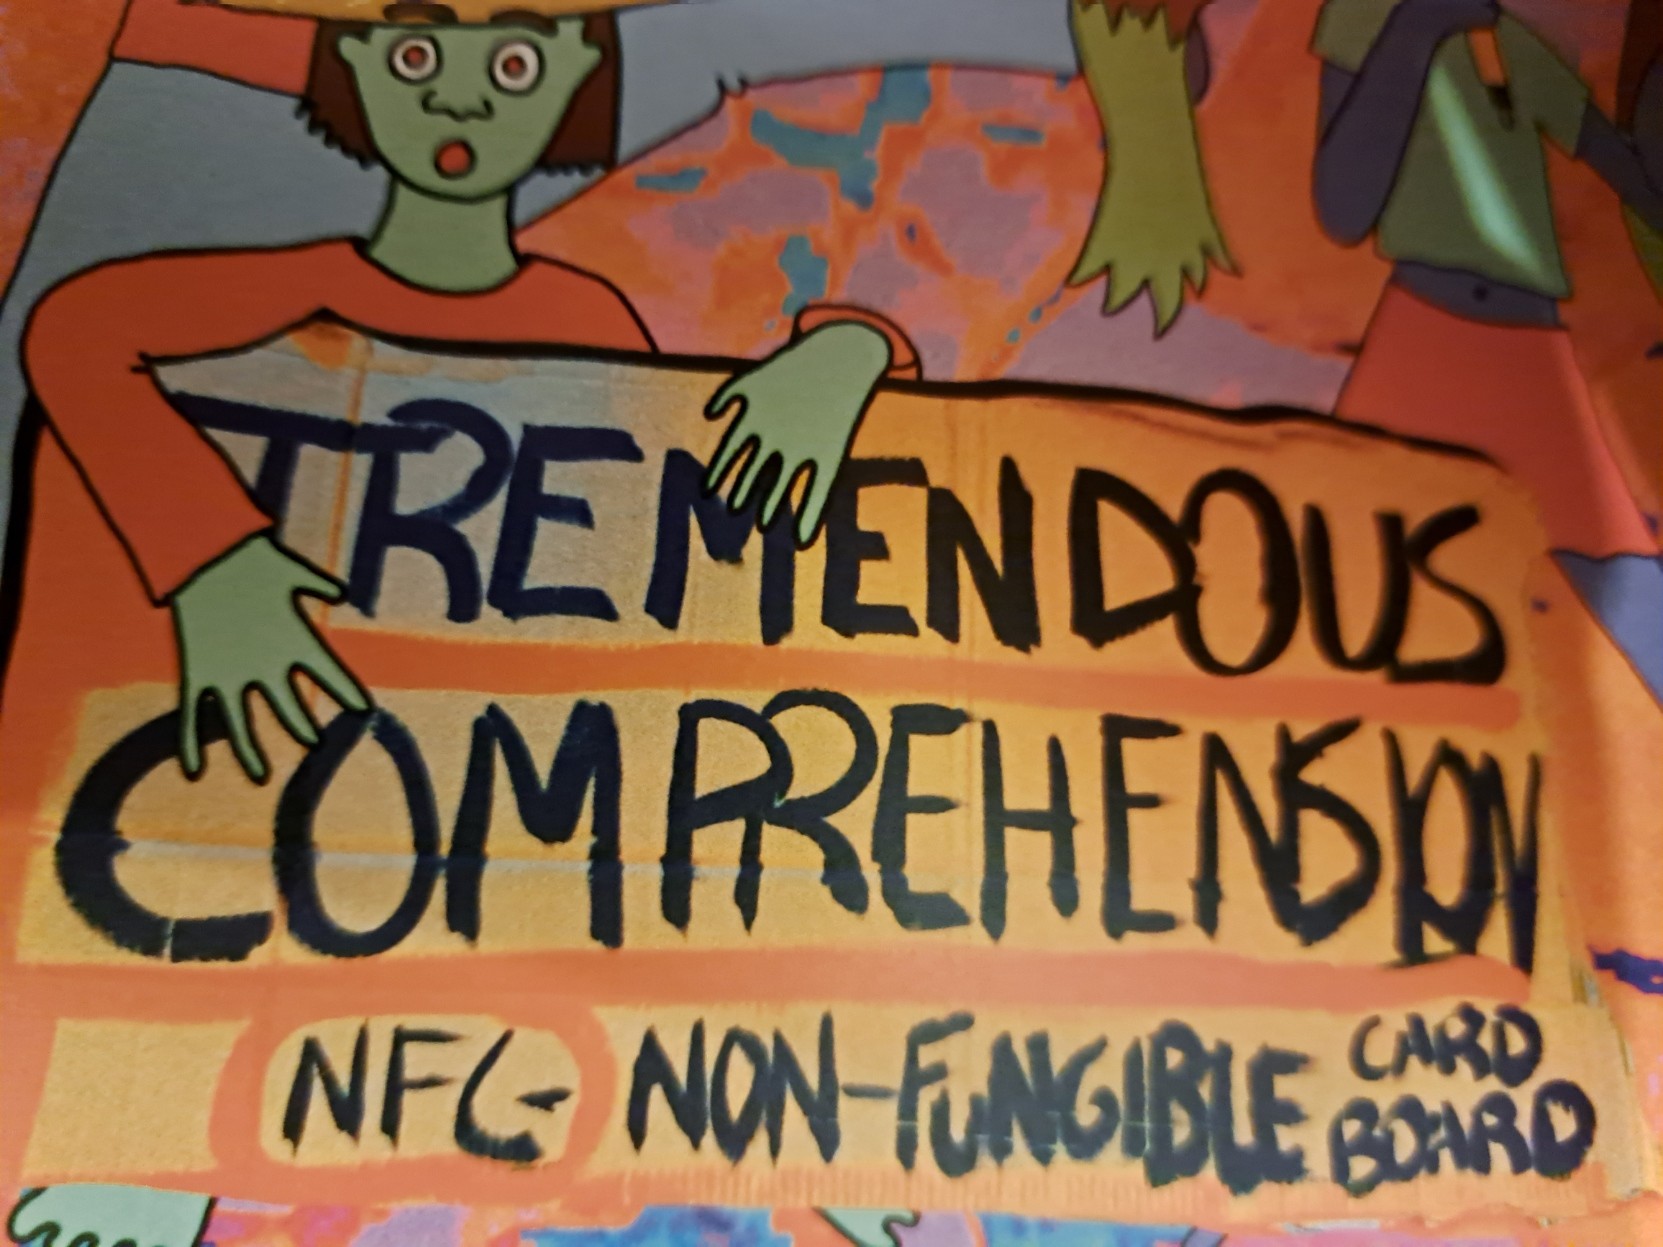 A section from on of the pages, where a character is seen holding a cardboard banner saying:  "Tremendous Comprehension    NFC- Non-Fungible Cardboard"